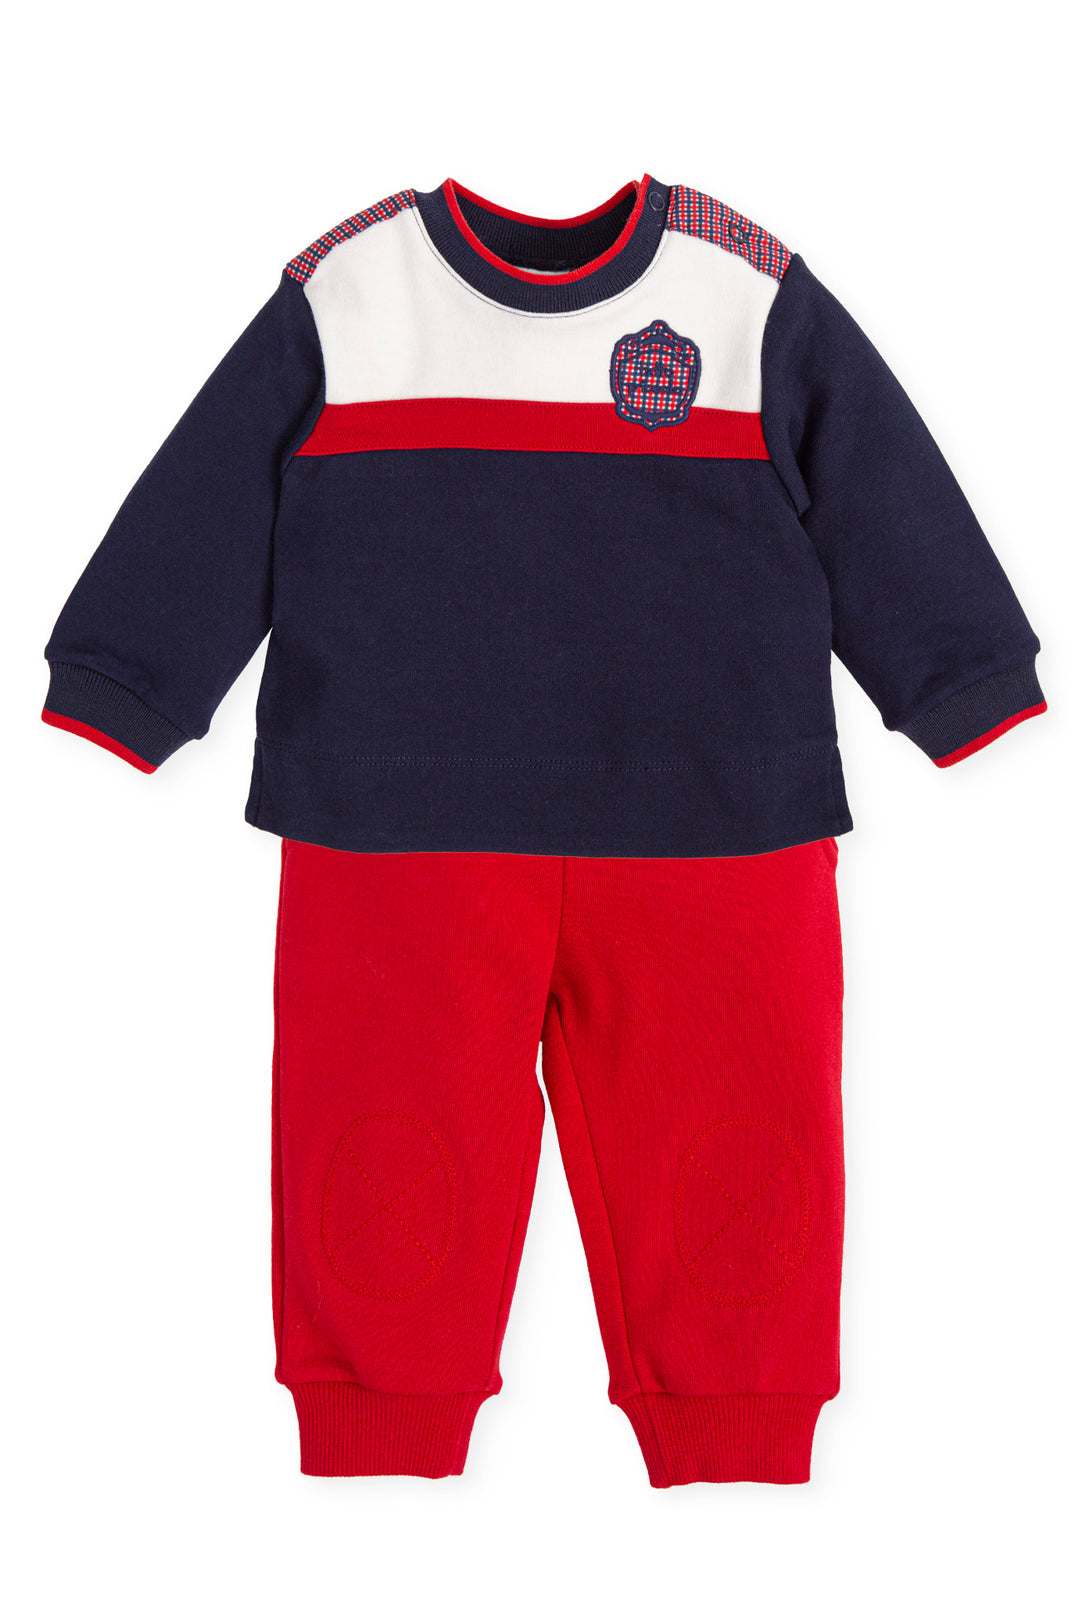 Tutto Piccolo "Ronan" Navy & Red Tracksuit | iphoneandroidapplications